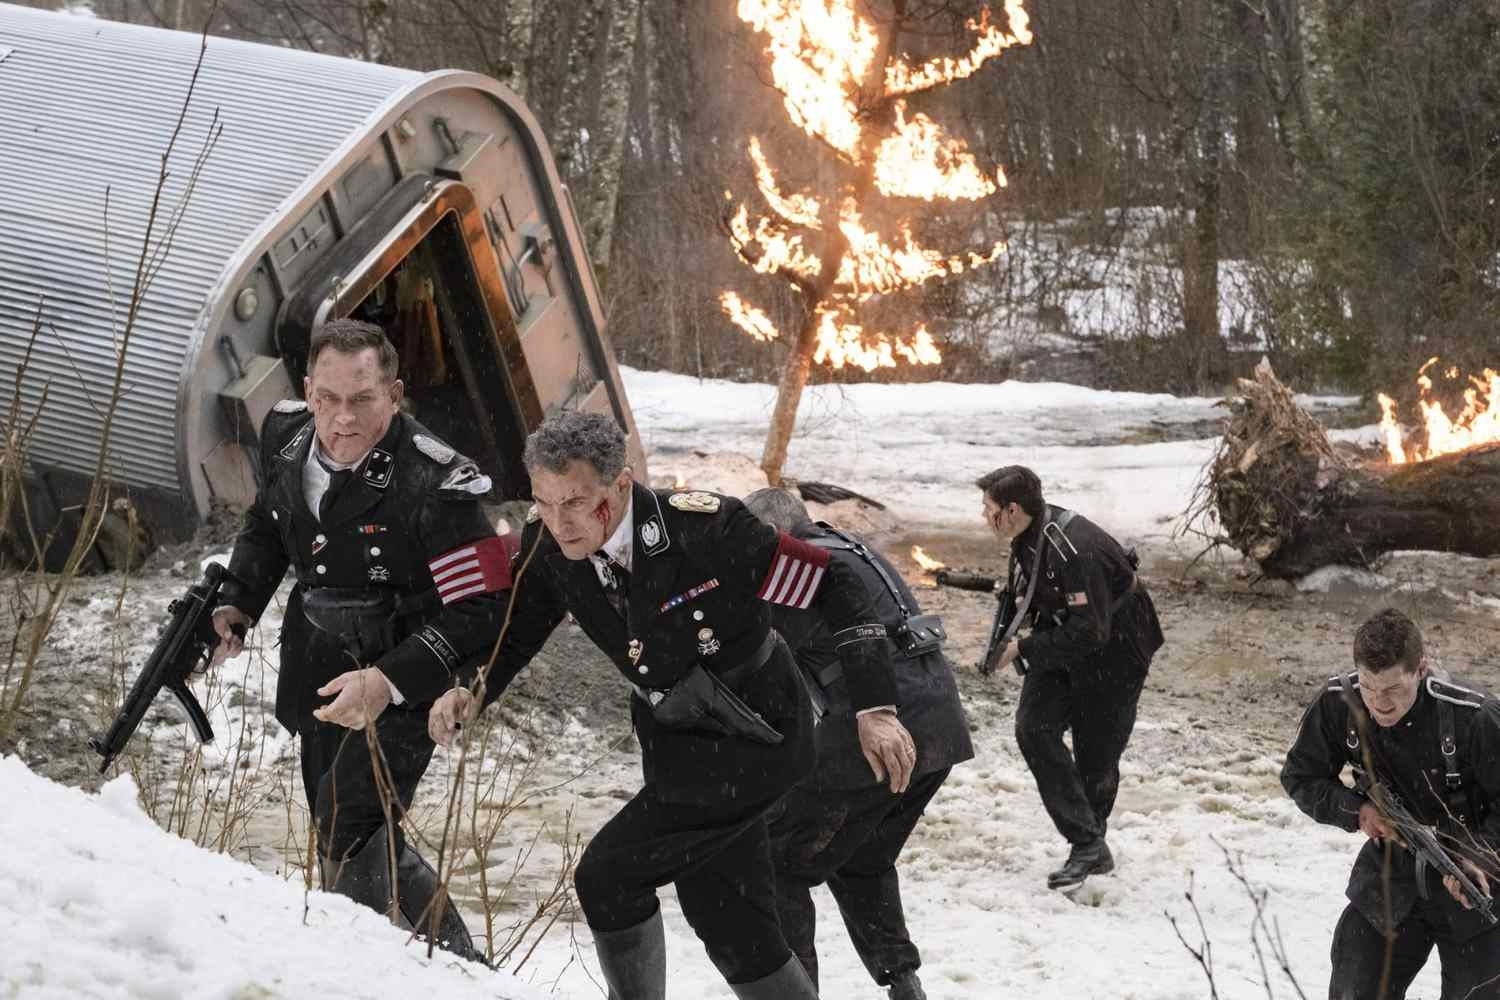 Characters in military uniforms flee an overturned, fiery vehicle in a snowy landscape